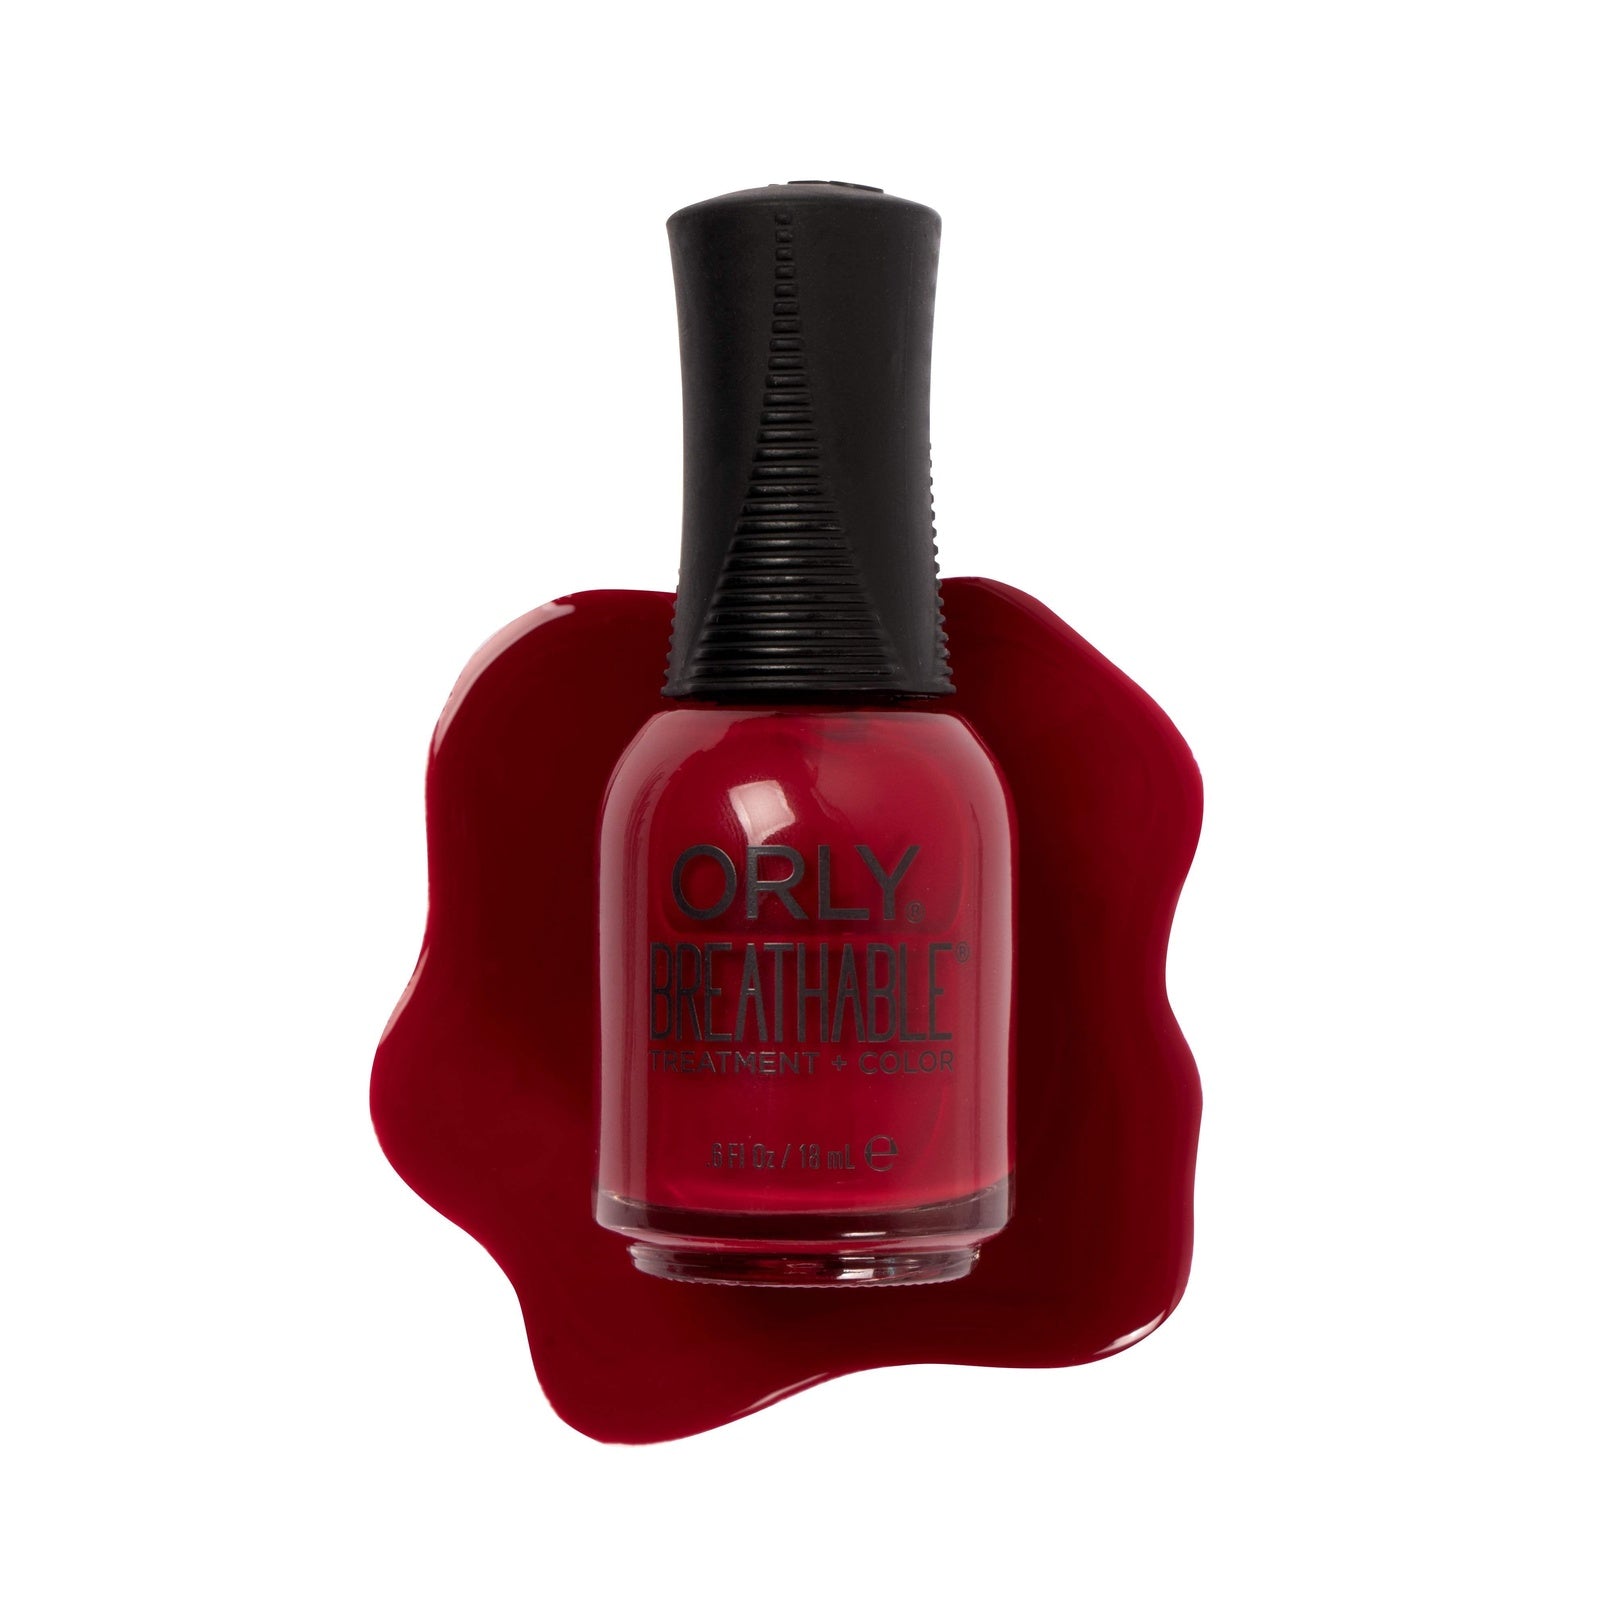 Orly Breathable Namaste Healthy .6Fl oz-Orly-Brand_Orly,Collection_Nails,Nail_Polish,ORLY_Fall Laquers,Season_Fall